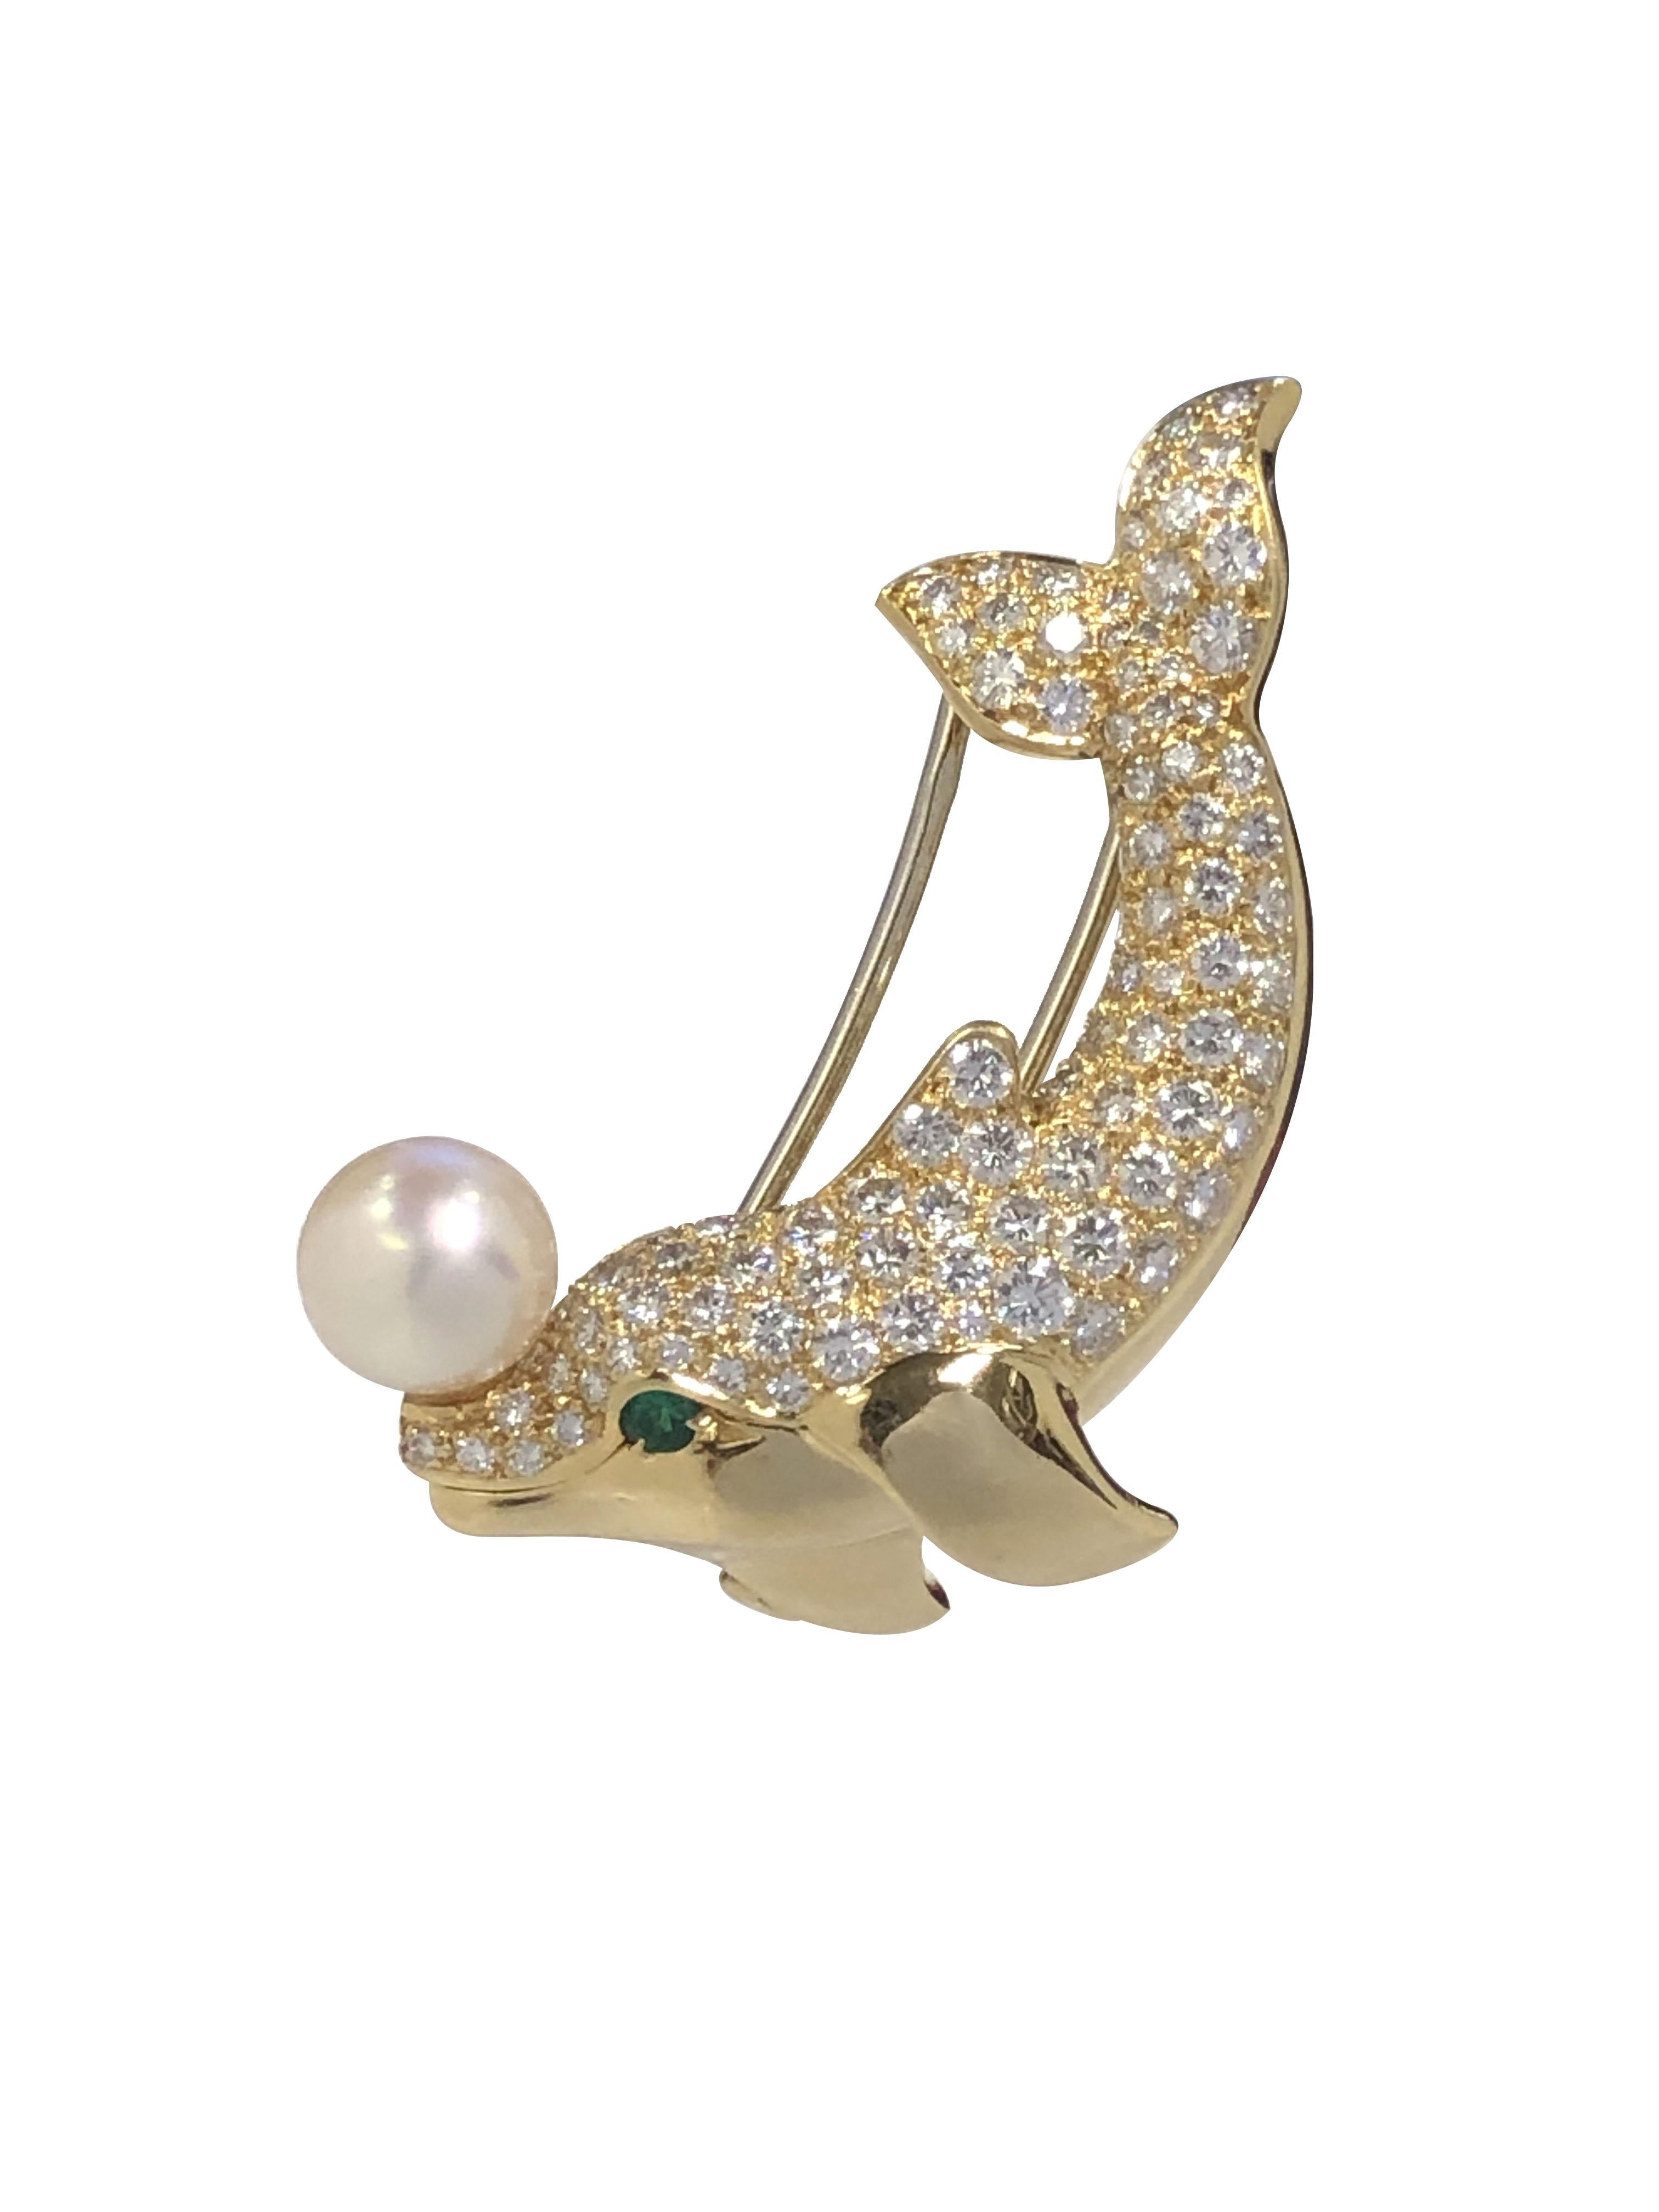 Circa 1990s Cartier Paris Whimsical Dolphin Clip Brooch, measuring 1 1/2 inches in length X 1 inch, set with Round Brilliant cut Diamonds totaling 3.50 Carats, further set with an Emerald Eye and a fine 7 M.M pearl balanced on the Dolphins nose.